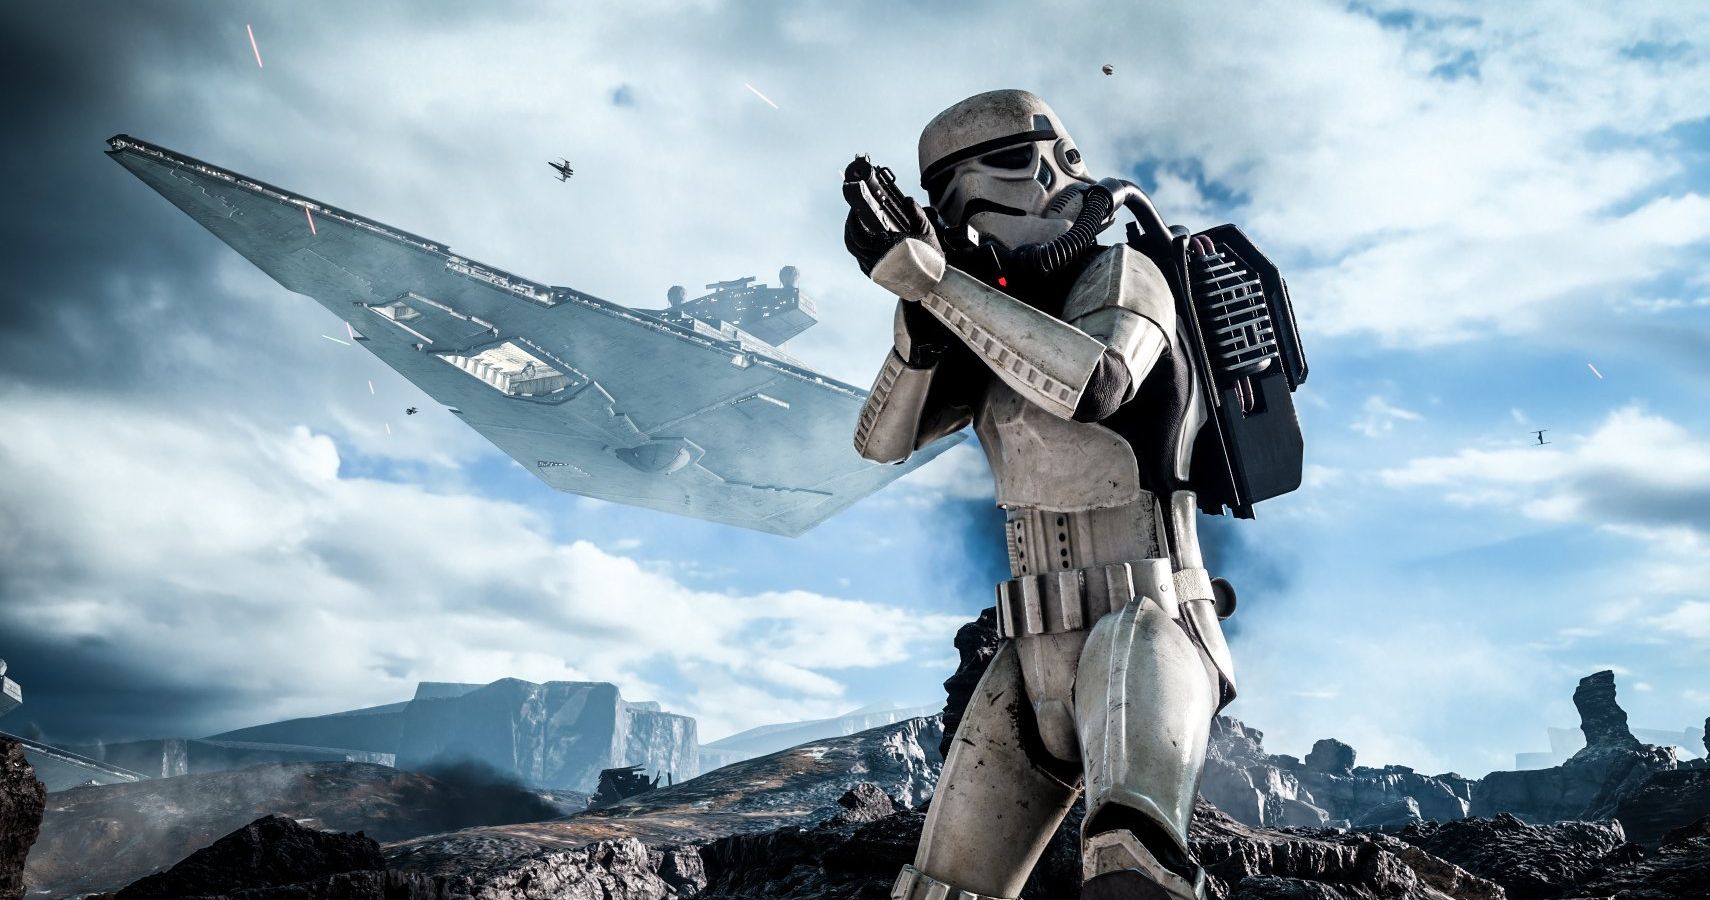 Ubisoft Confirms Its Star Wars Game Is Still In The "Early Stage Of